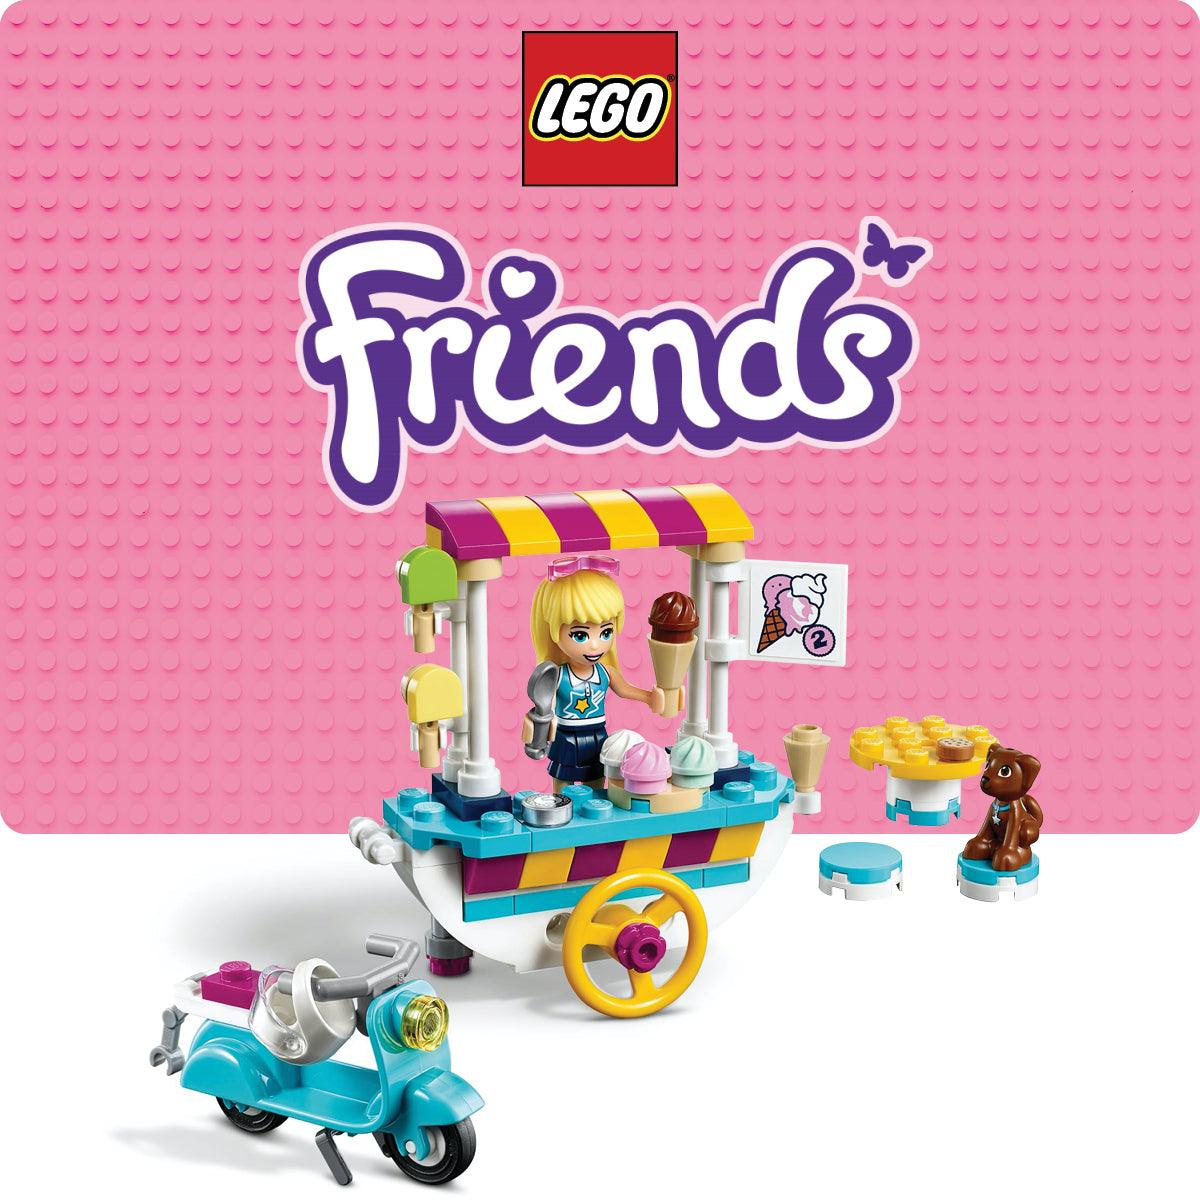 Lego Friends Surf Board Hot Pink Accessories Toys 1694/18